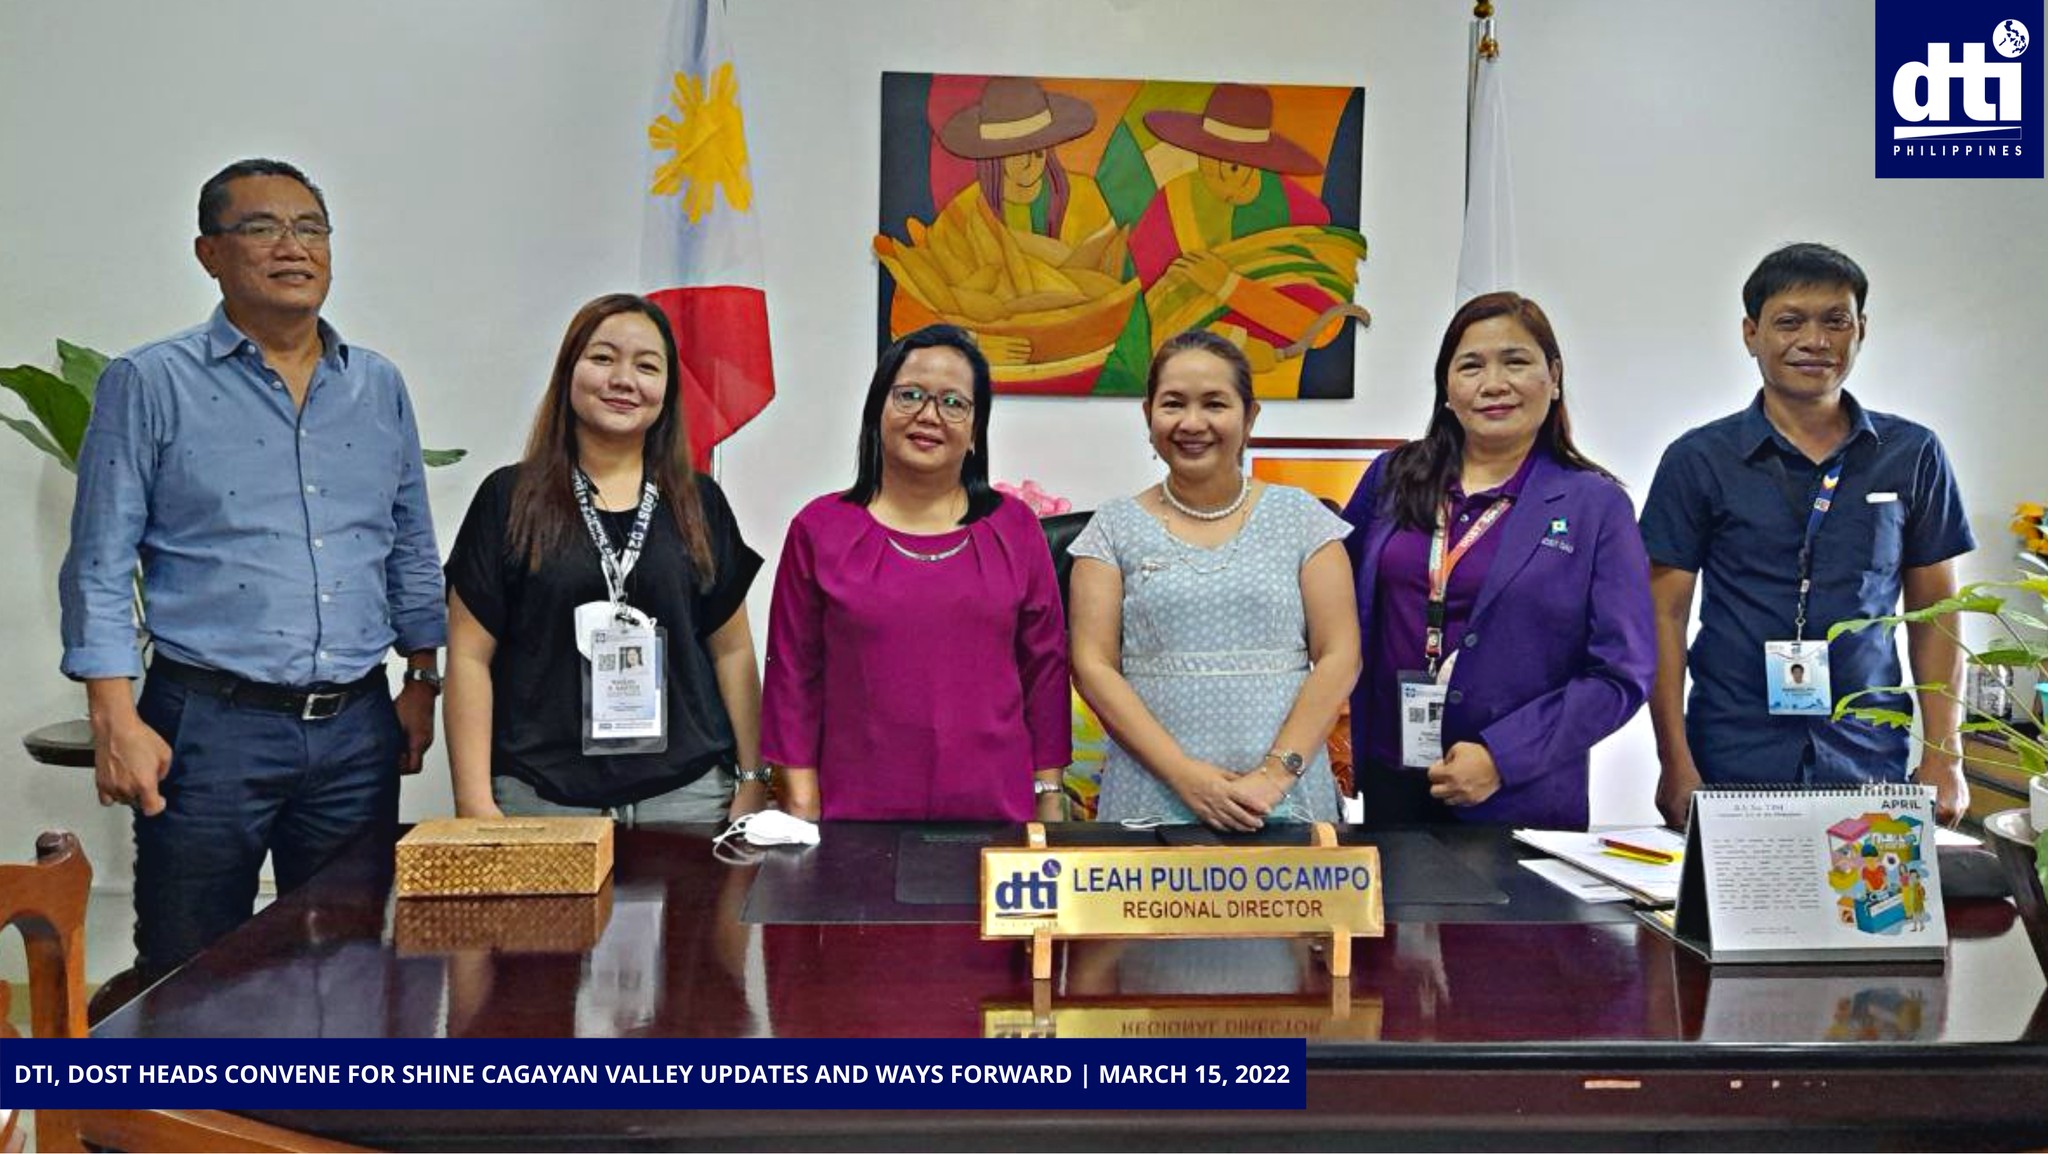 DTI, DOST CONVENE FOR SHINE CAGAYAN VALLEY UPDATES AND WAYS FORWARD 1